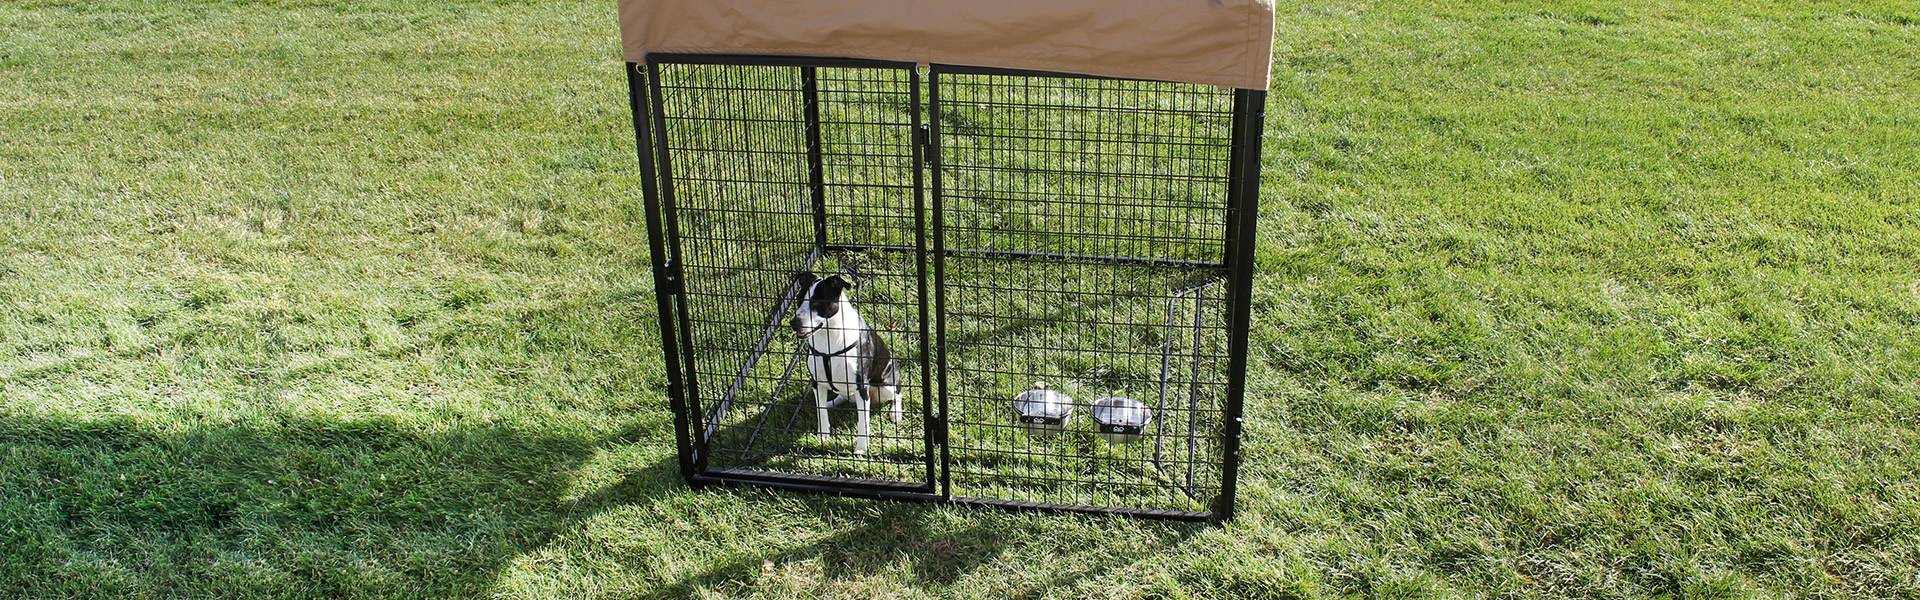 A dog in a welded dog kennel on the grassland.